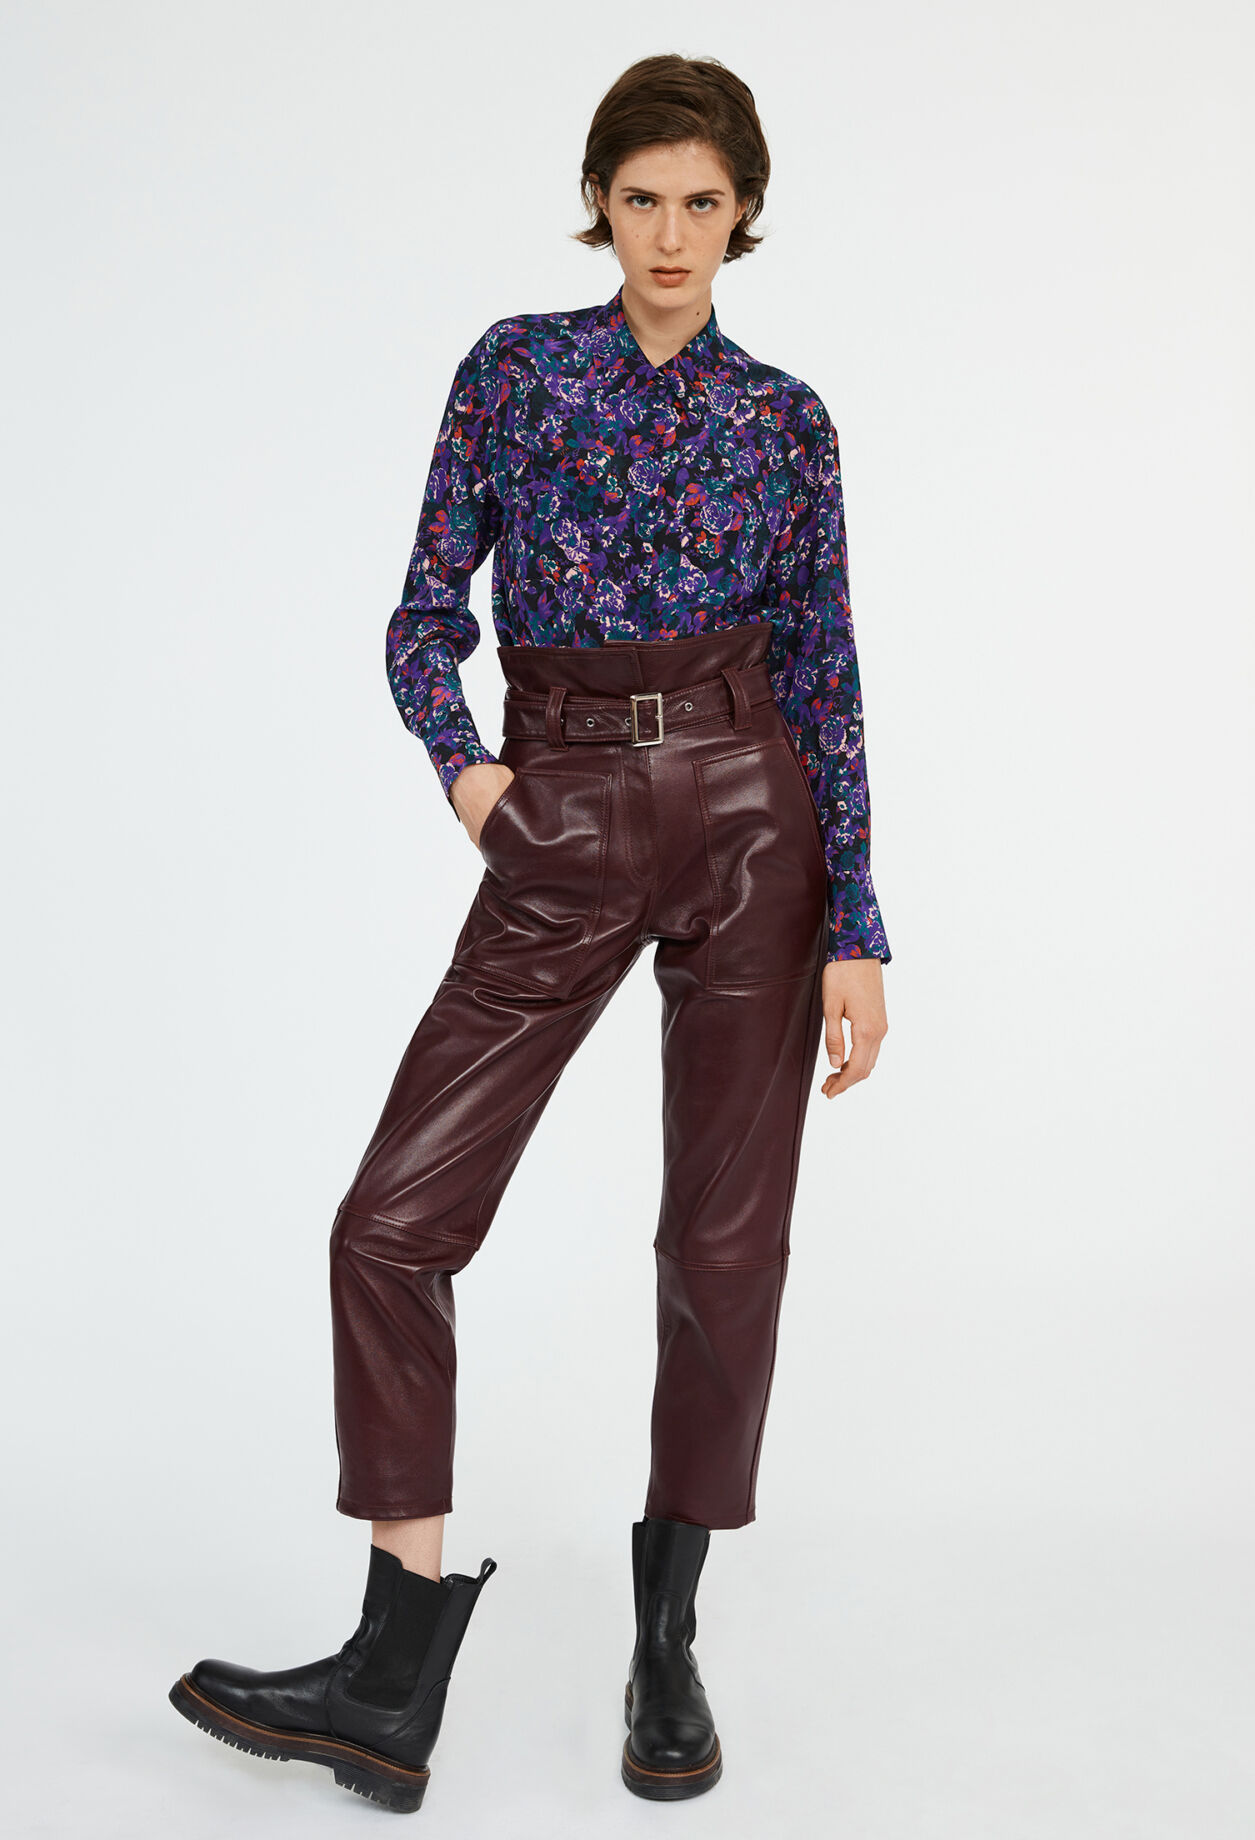 A Feminine Way to Style Leather Pants for Fall - Fashion Jackson